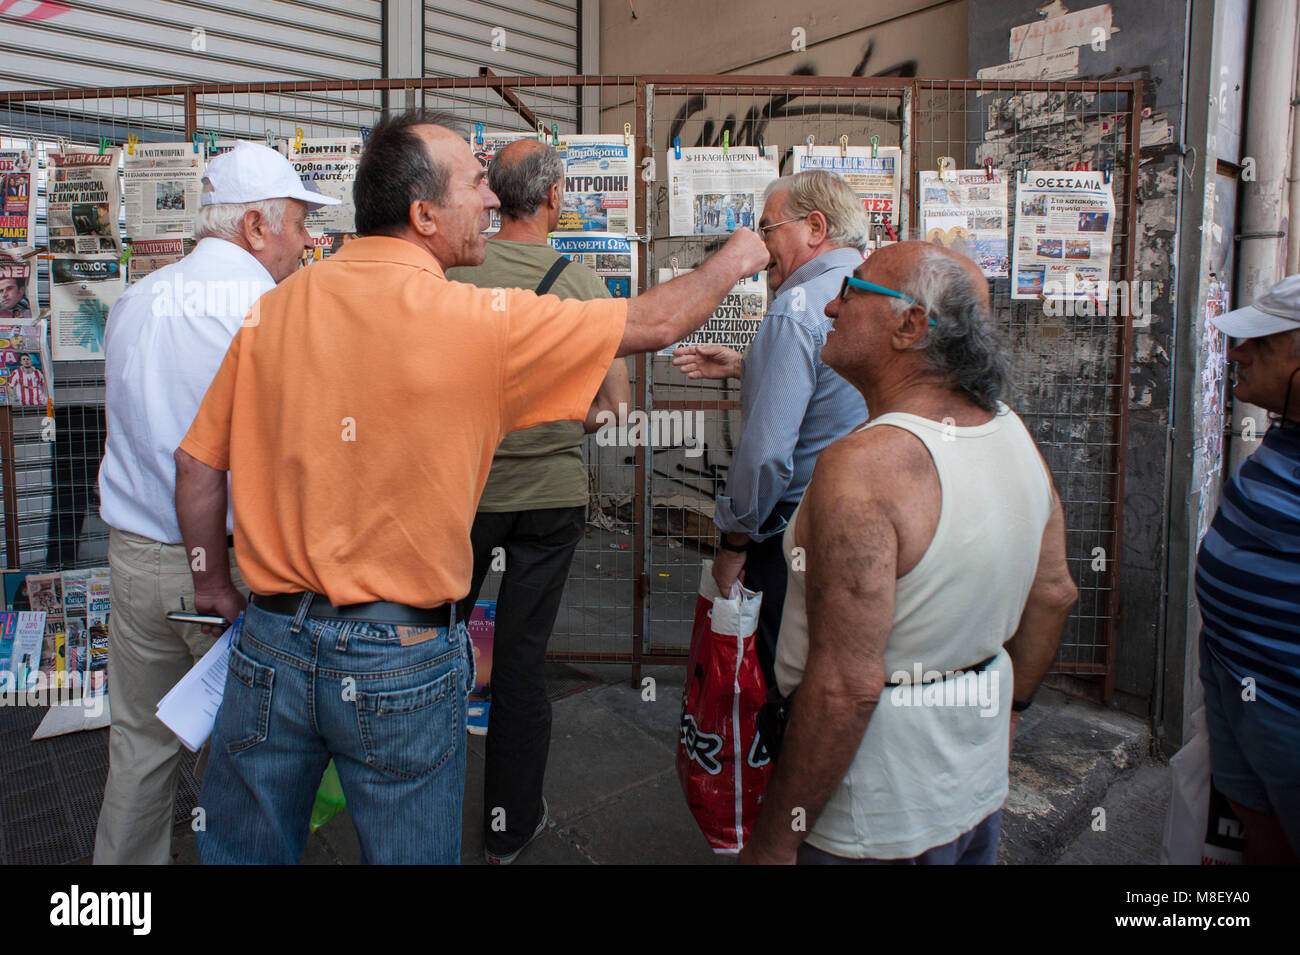 Athens. Elderly people discussing about the referendum, Omonia square. Greece. Stock Photo